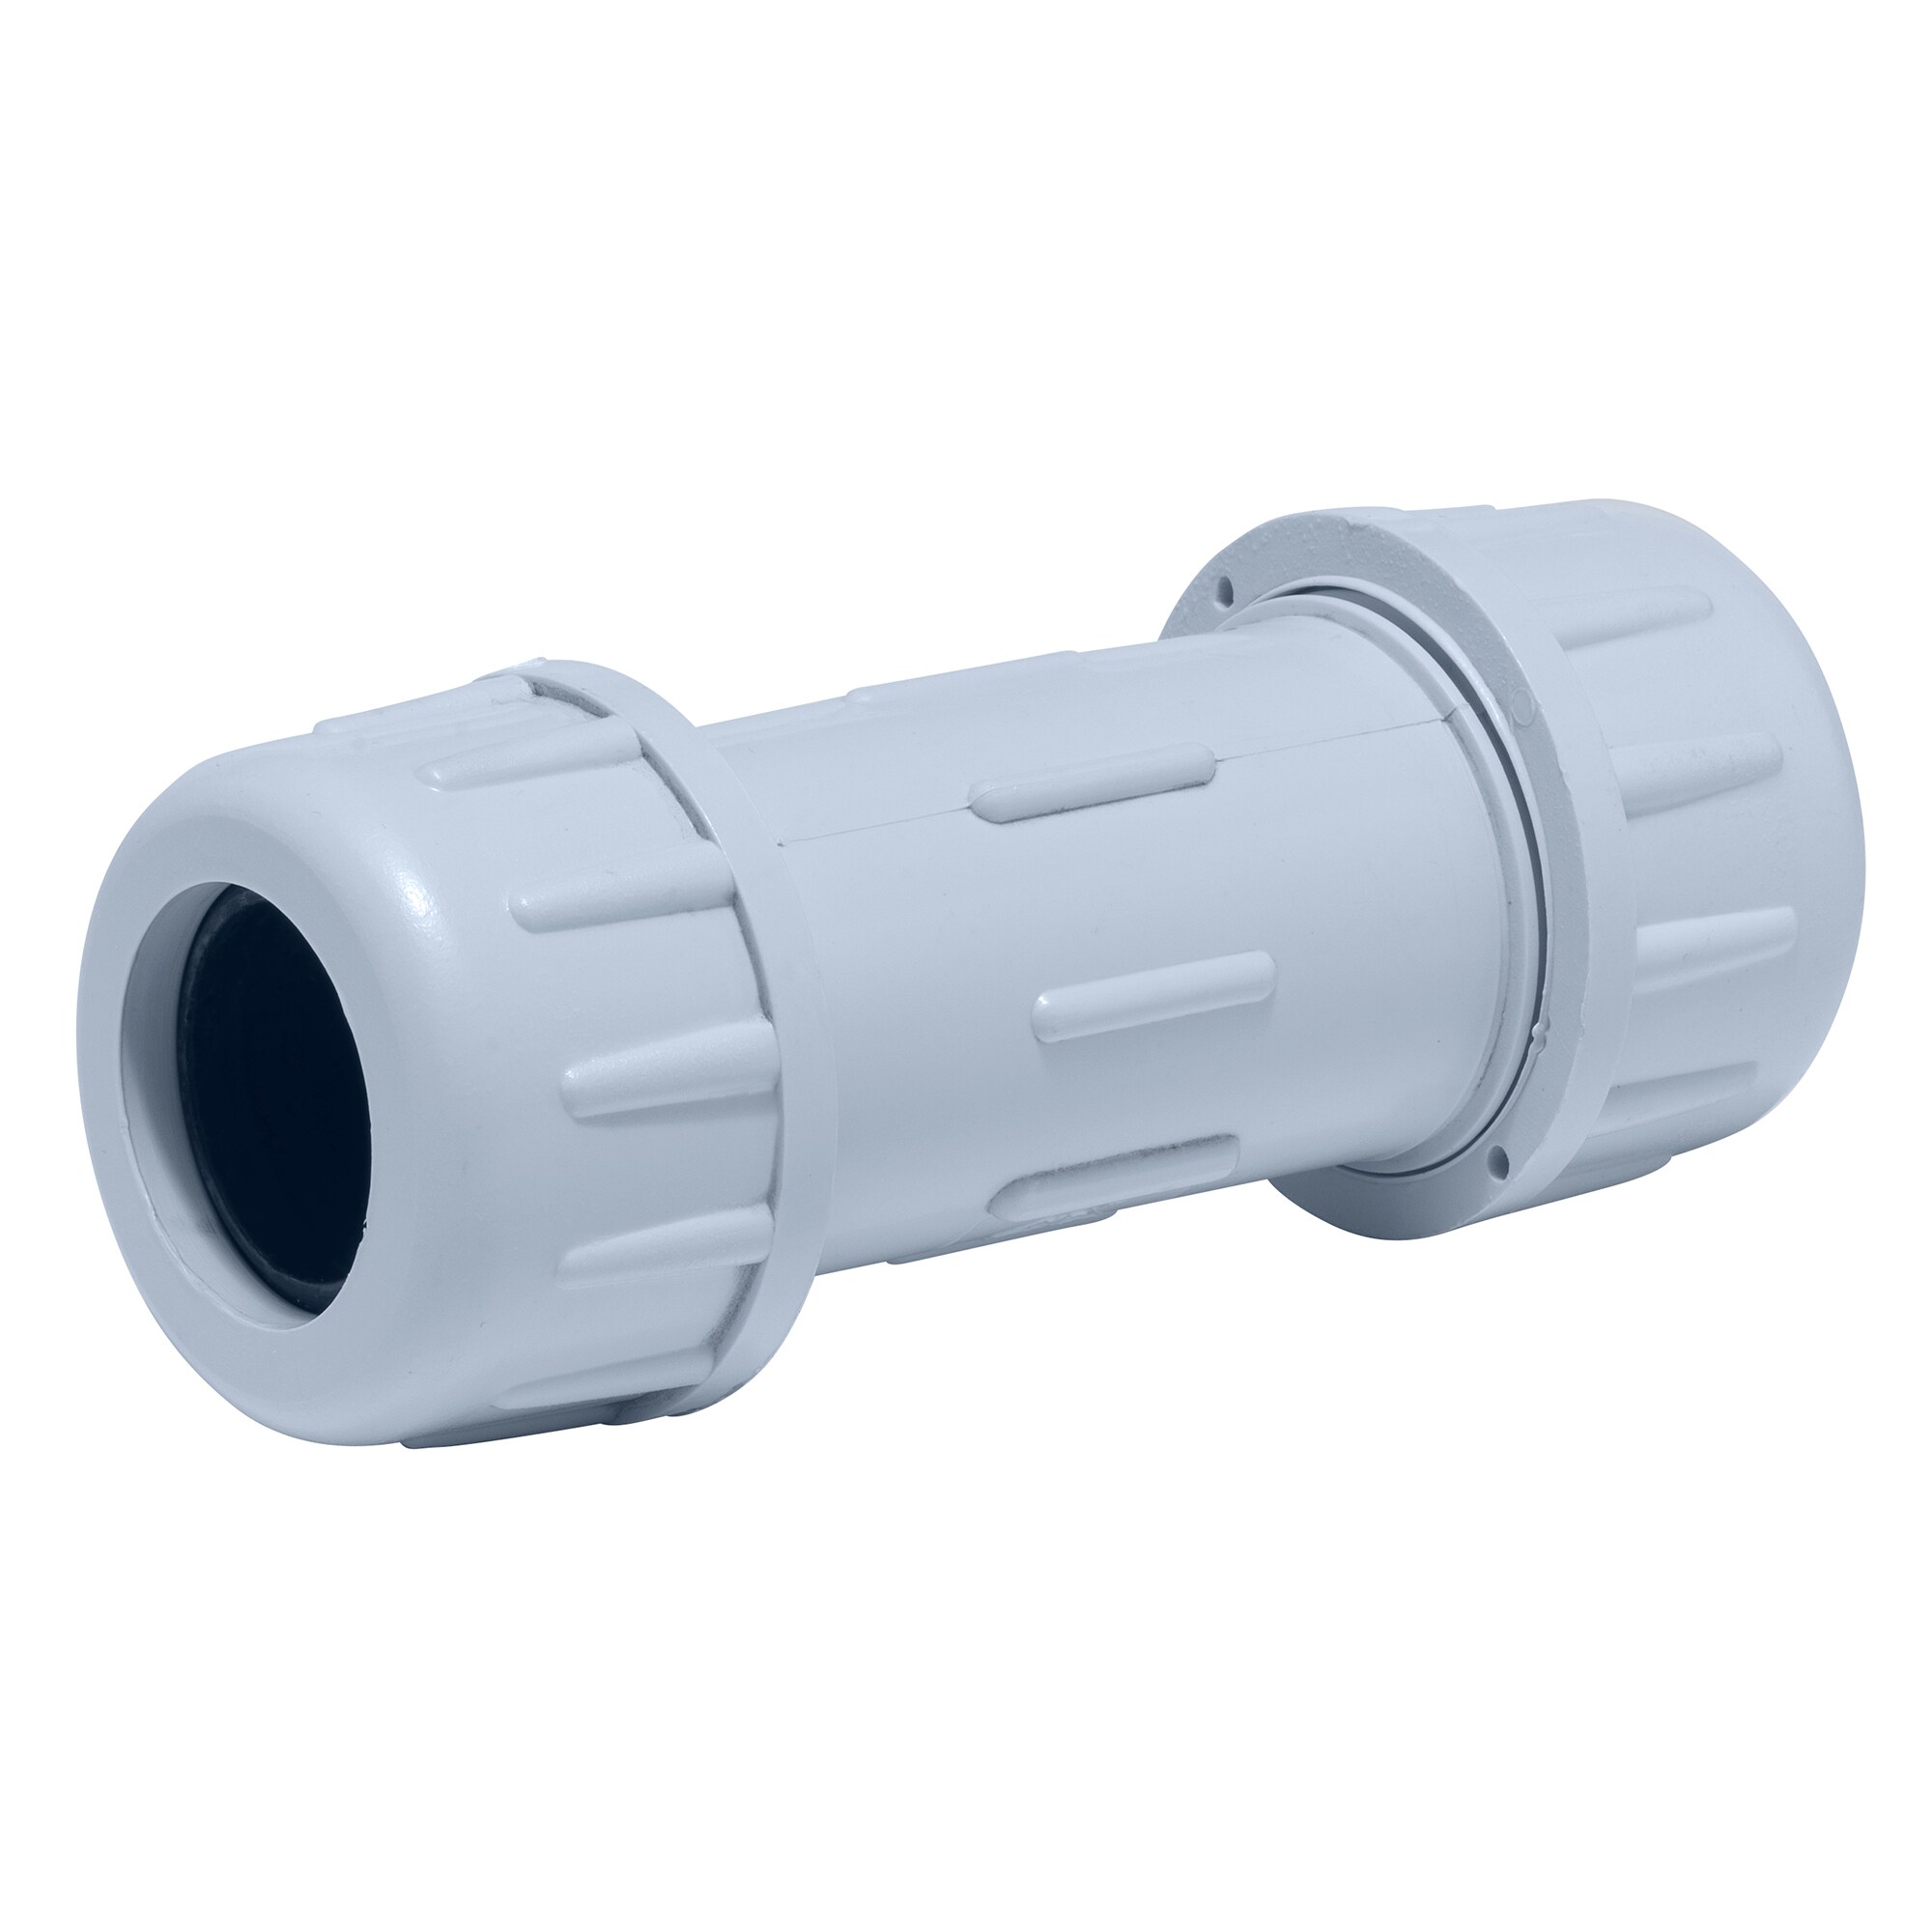 B and K Industries 1inch PVC Compression Couplings 160-105 for sale online 